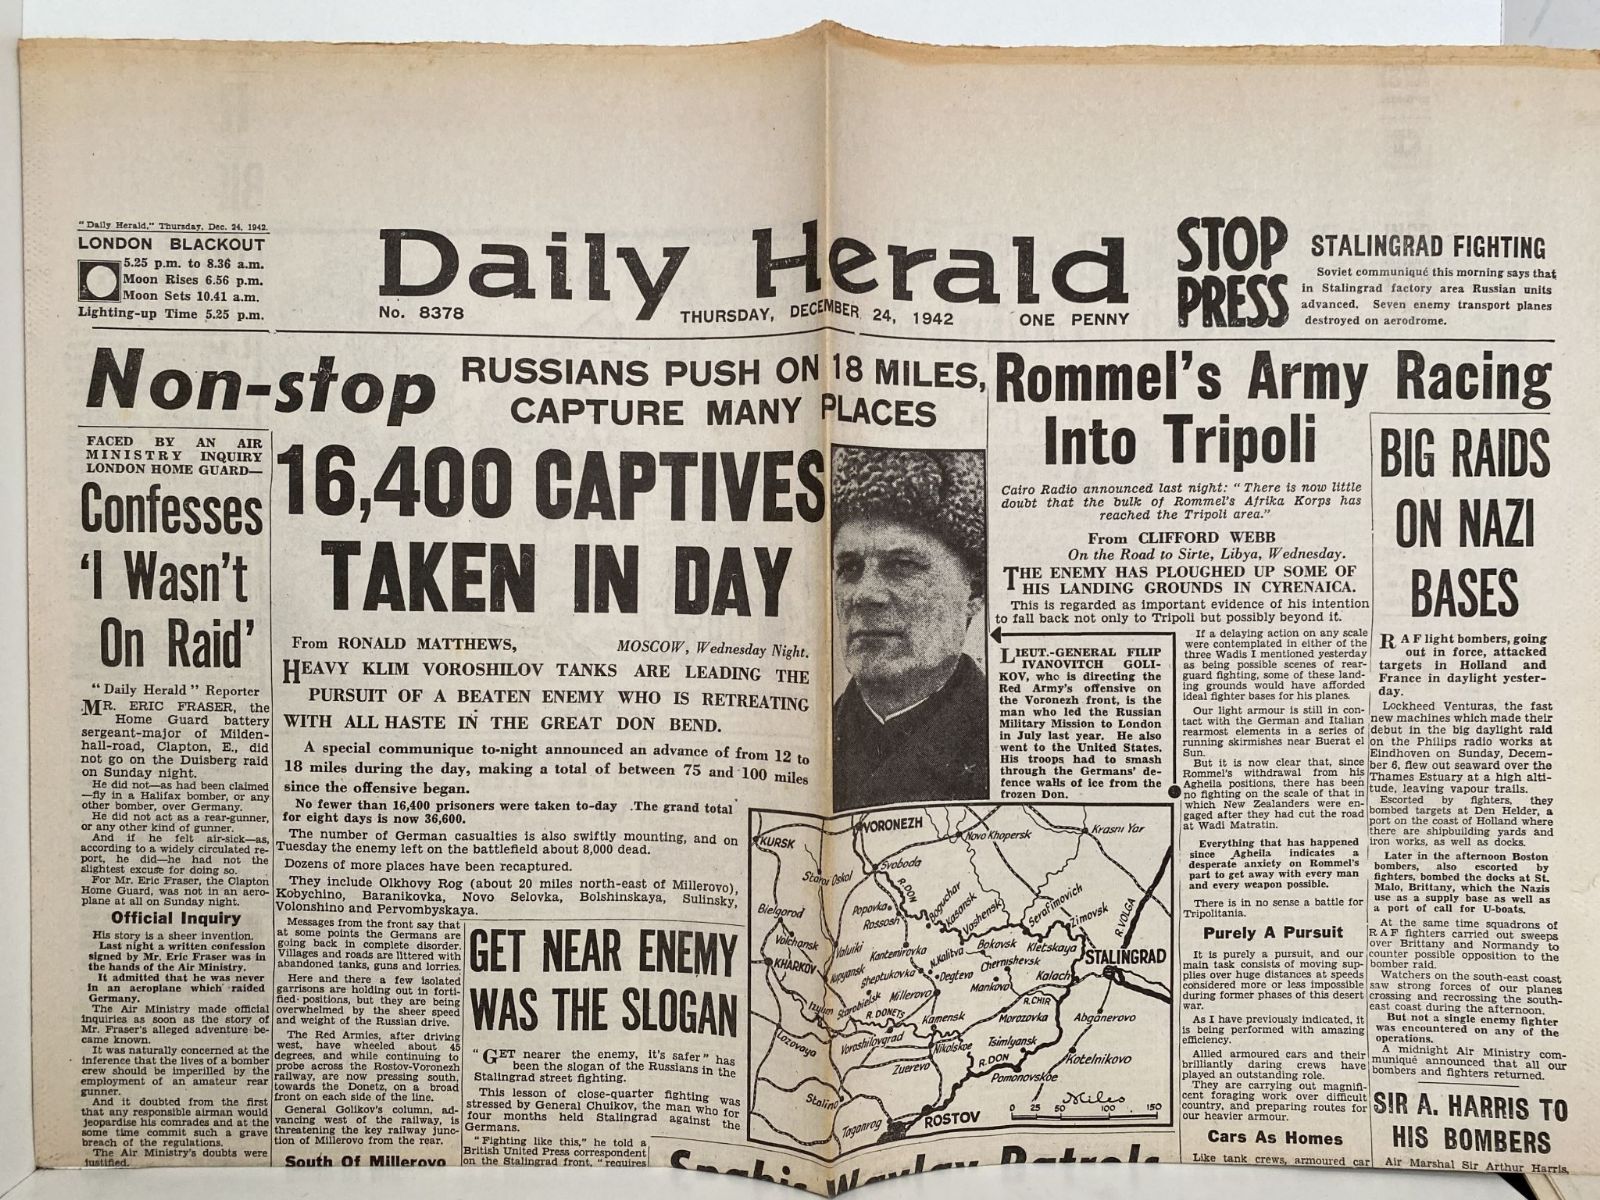 OLD WARTIME NEWSPAPER: Daily Herald, 24 December 1942